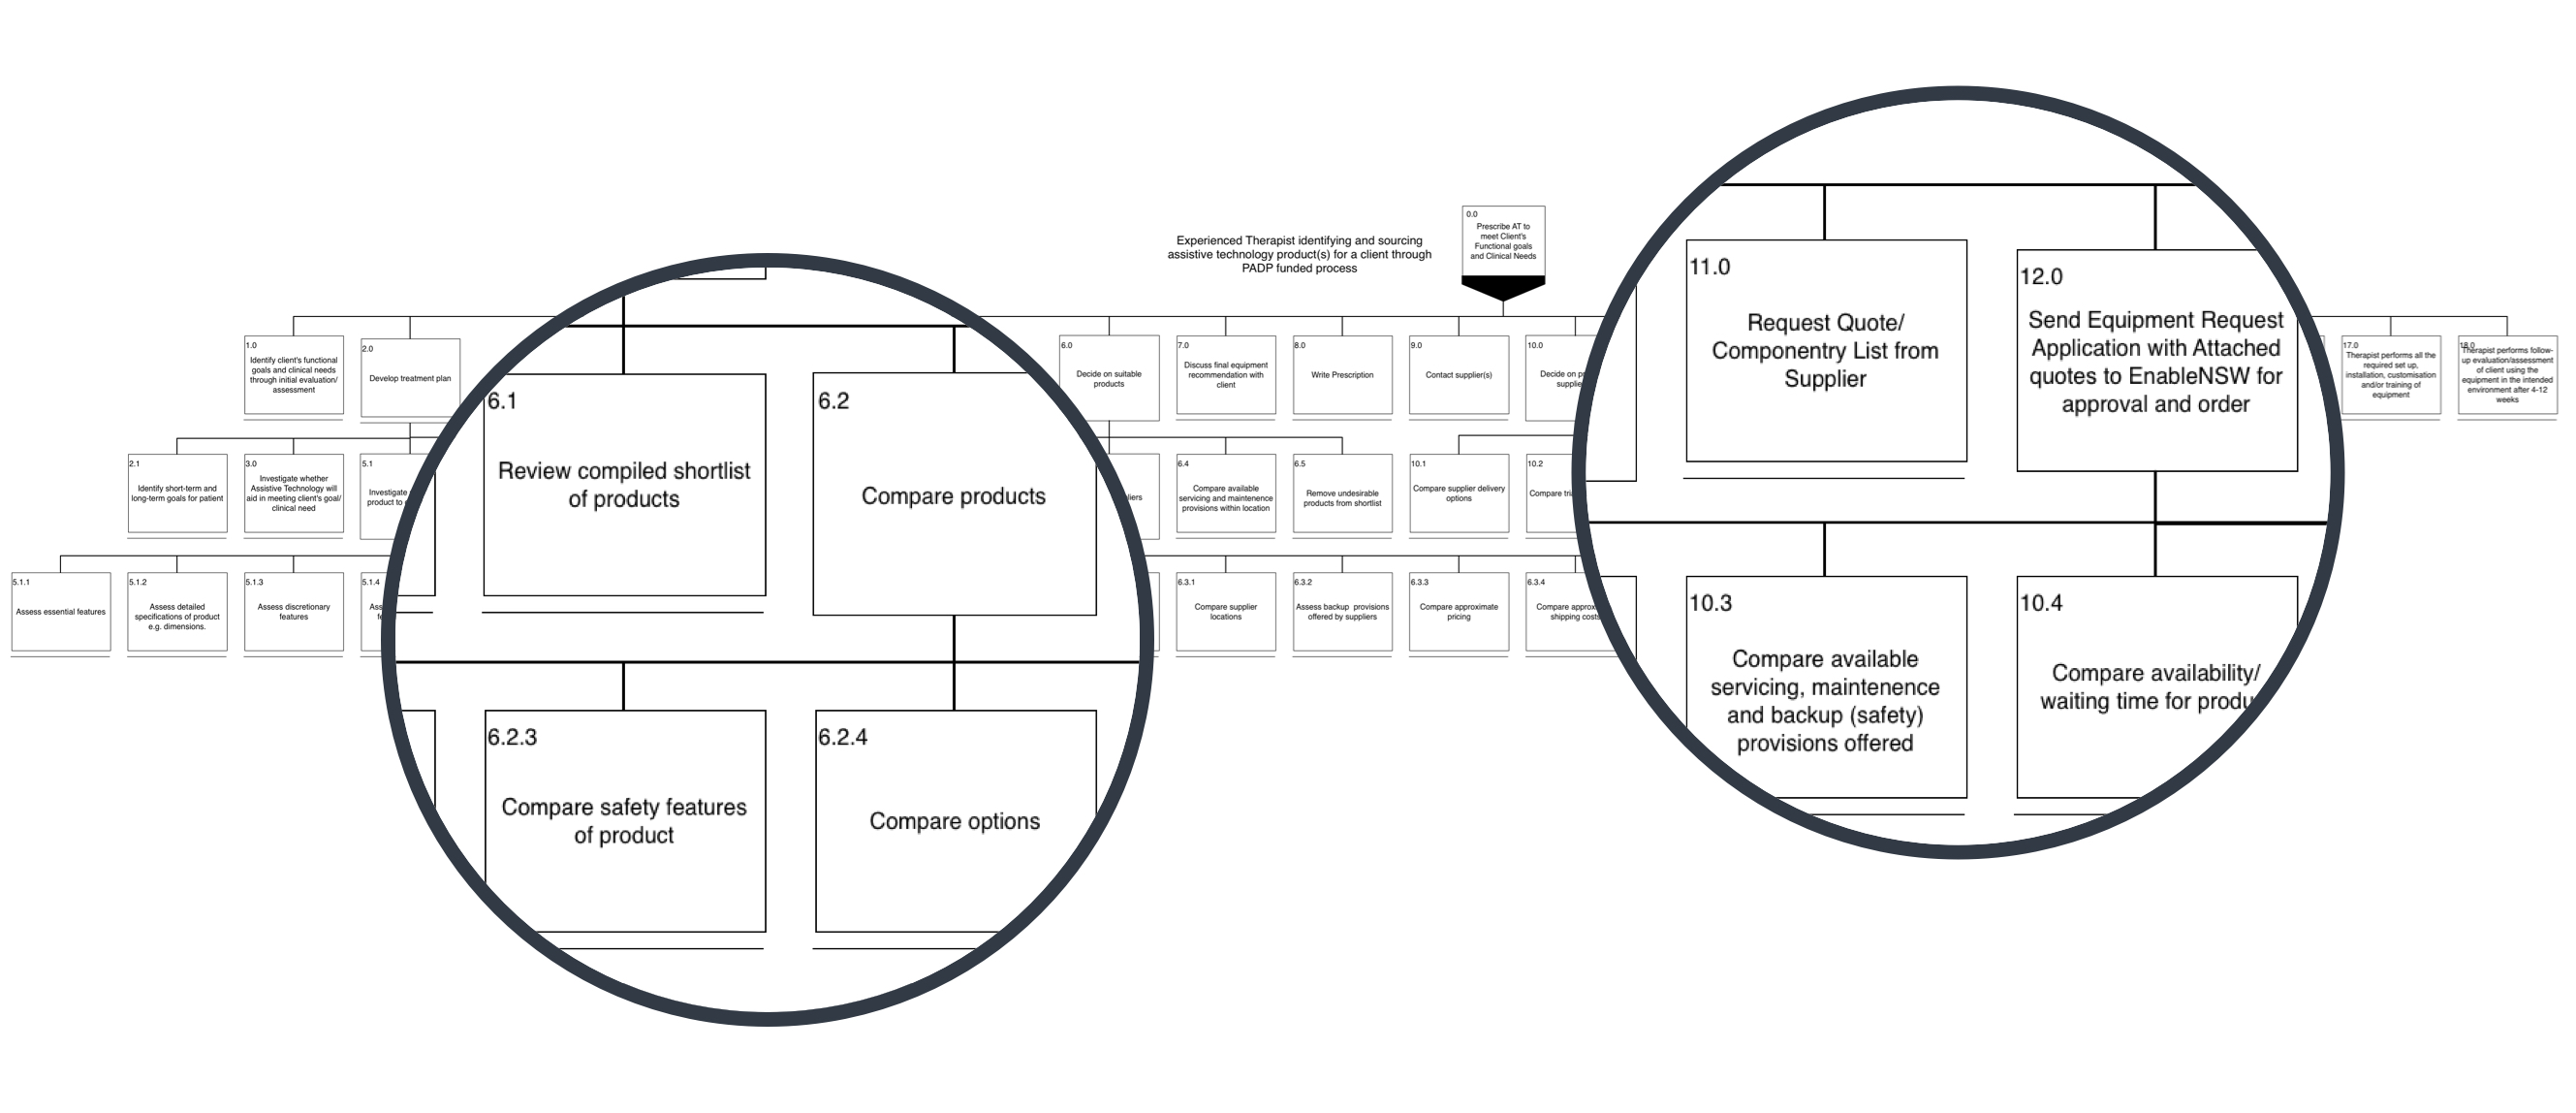 Hierarchical Task analysis map highlighting the steps of comparing products, comparing discretionary features, comparing suppliers and comparing supplier locations.